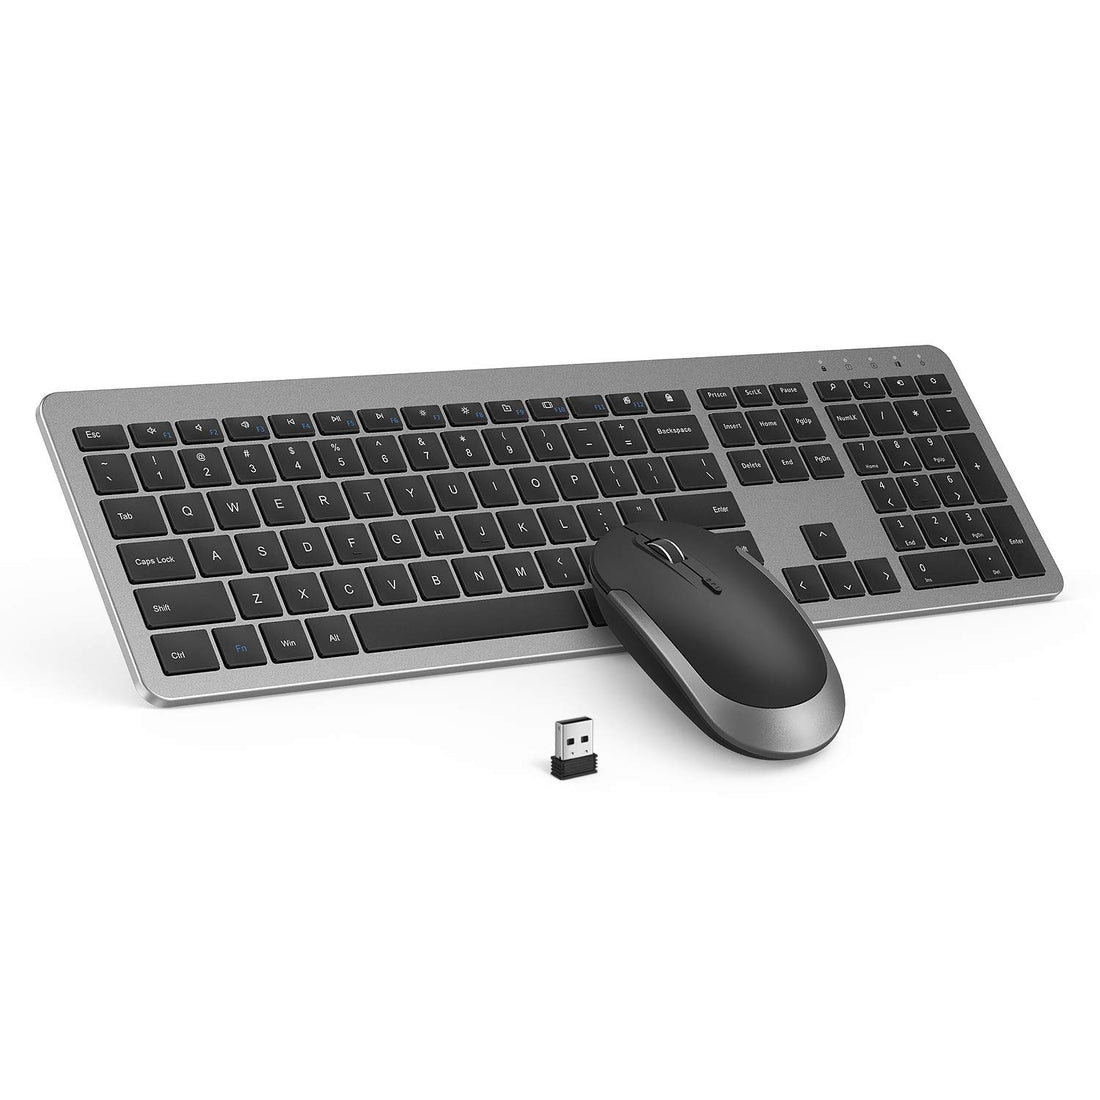 Wireless Keyboard and Mouse Combo - Full Size Slim Thin Wireless Keyboard Mouse with Numeric Keypad 2.4G Stable Connection Adjustable DPI (Grey & Black)